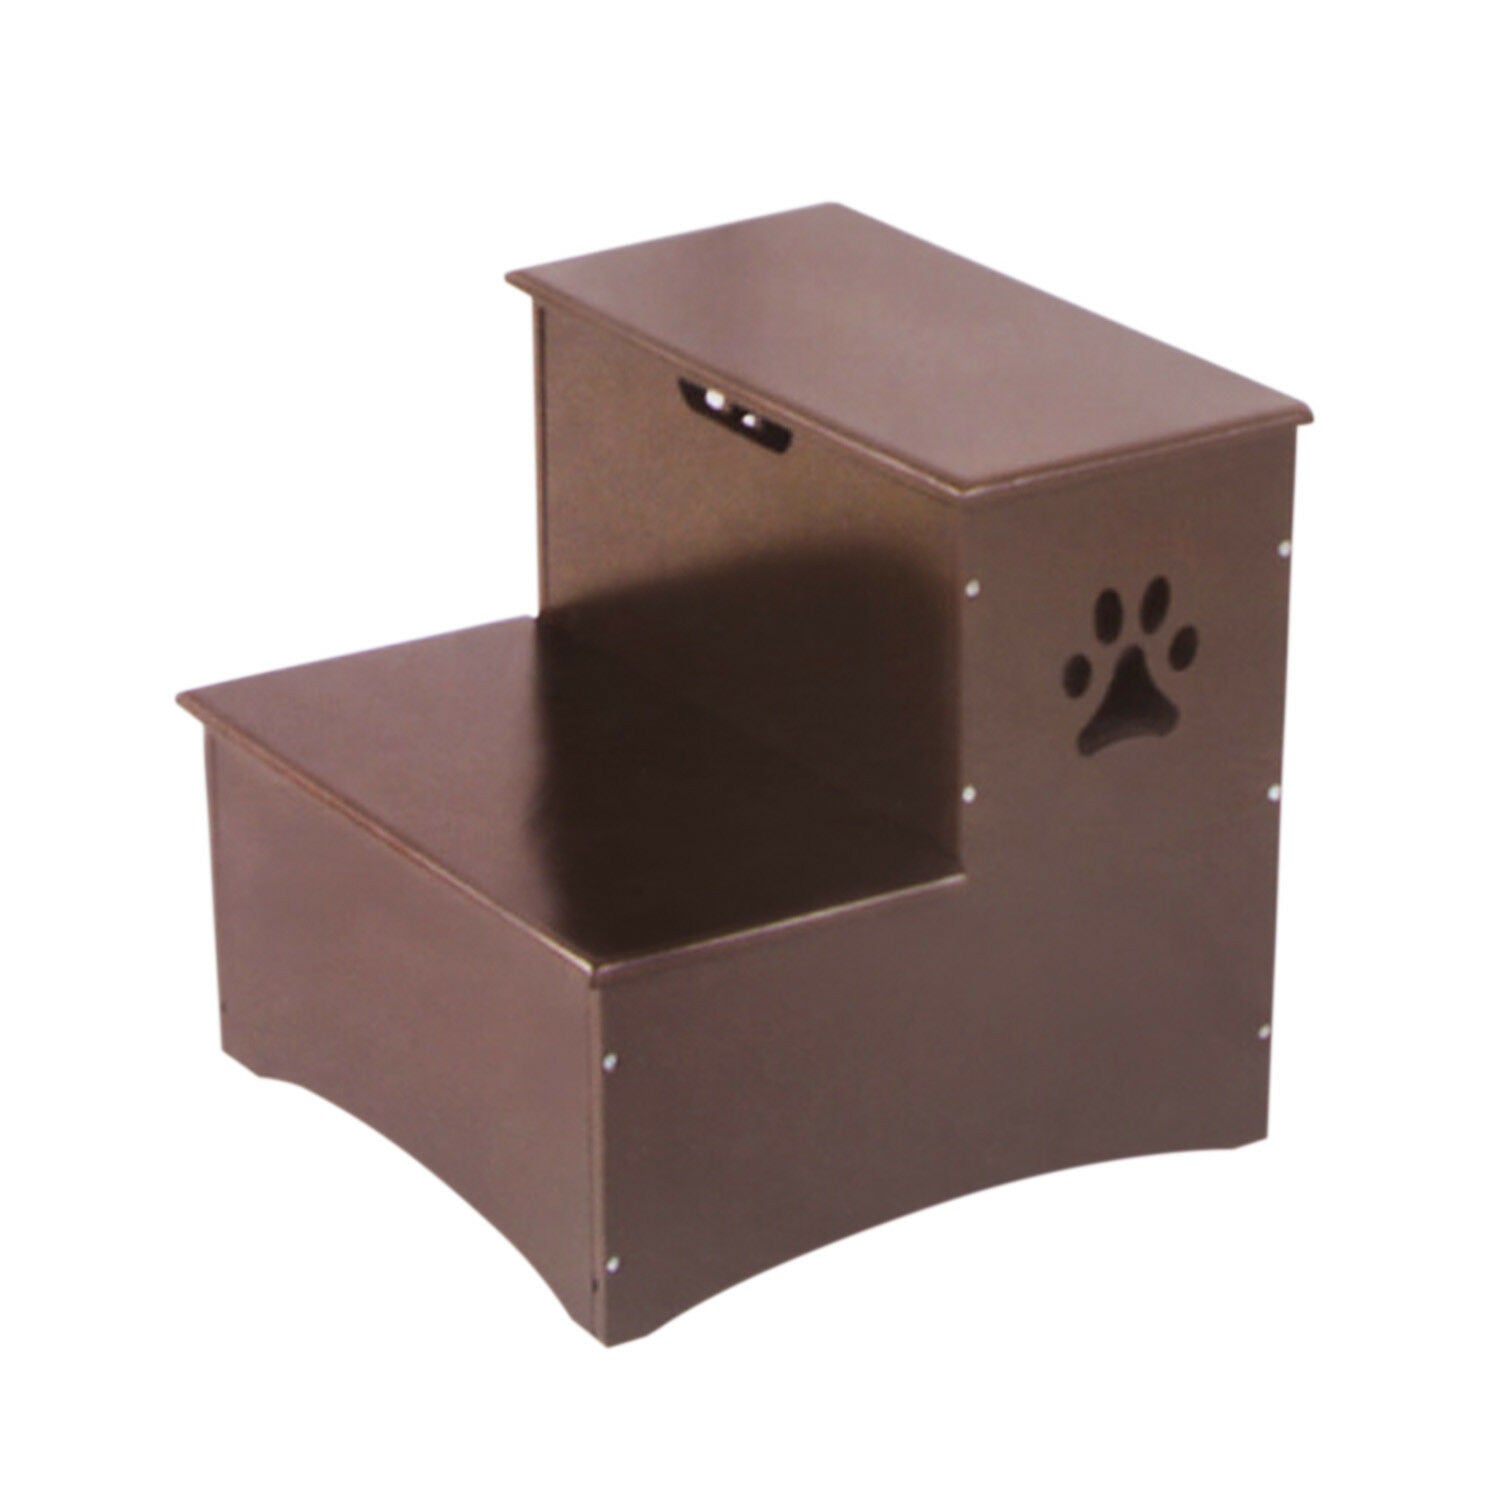 Wooden Pet Dog Steps With Storage - Wood Pet Step With Storage